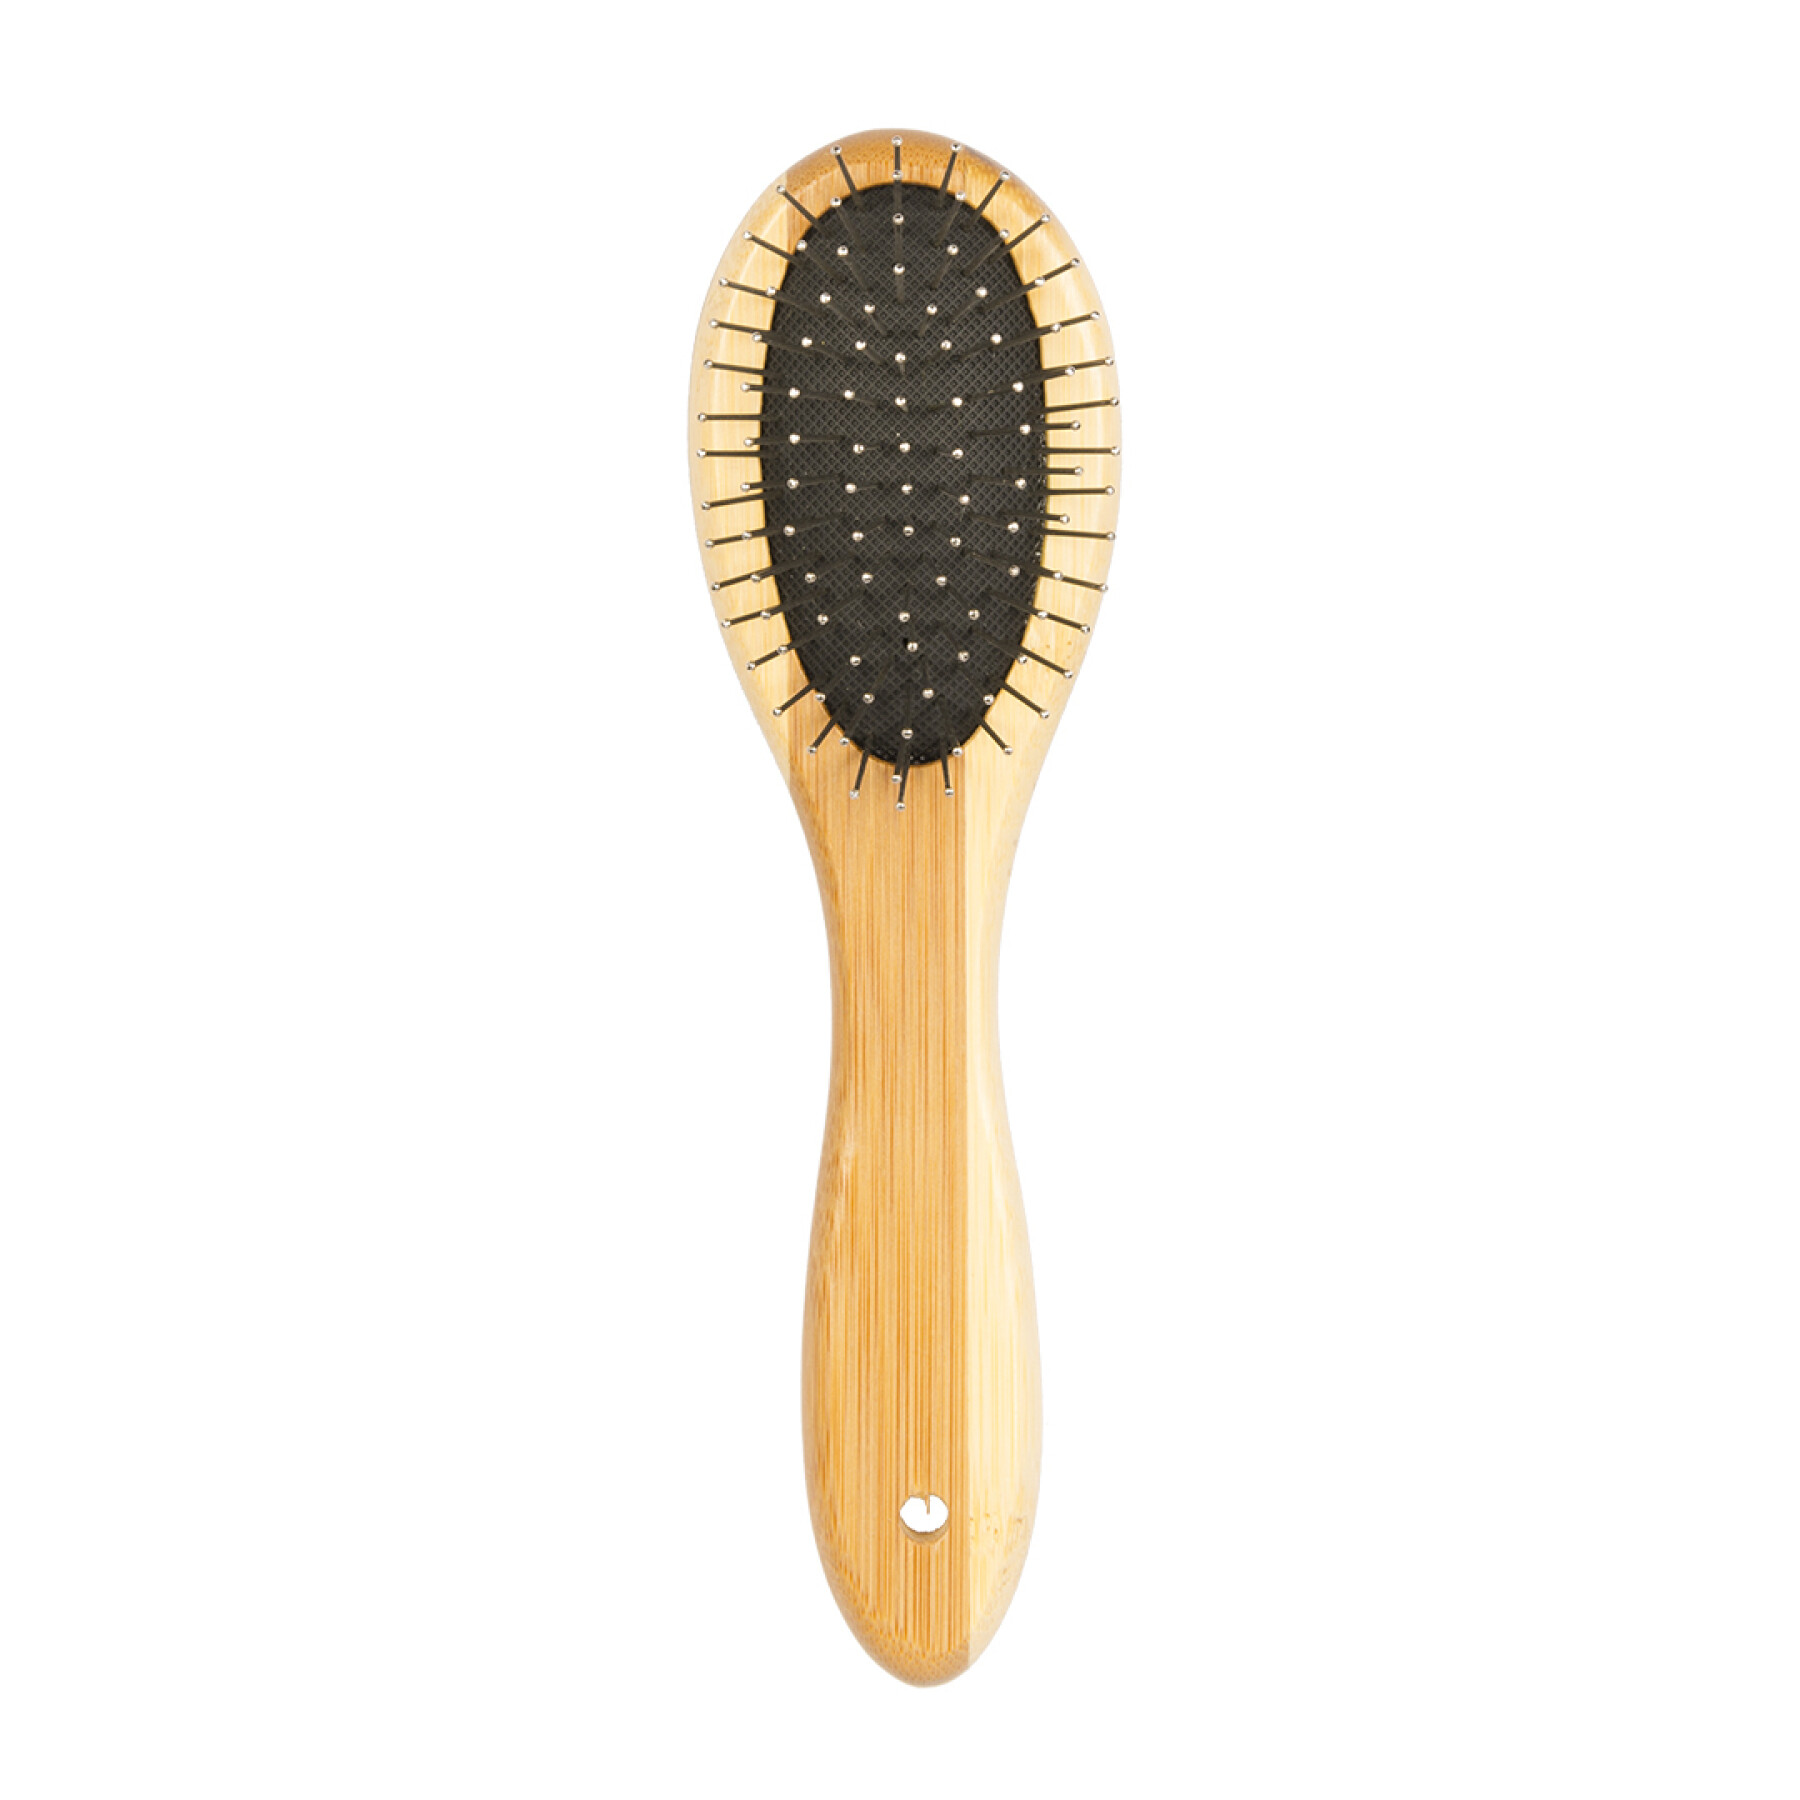 Spiked dog brush with bamboo handle Duvoplus